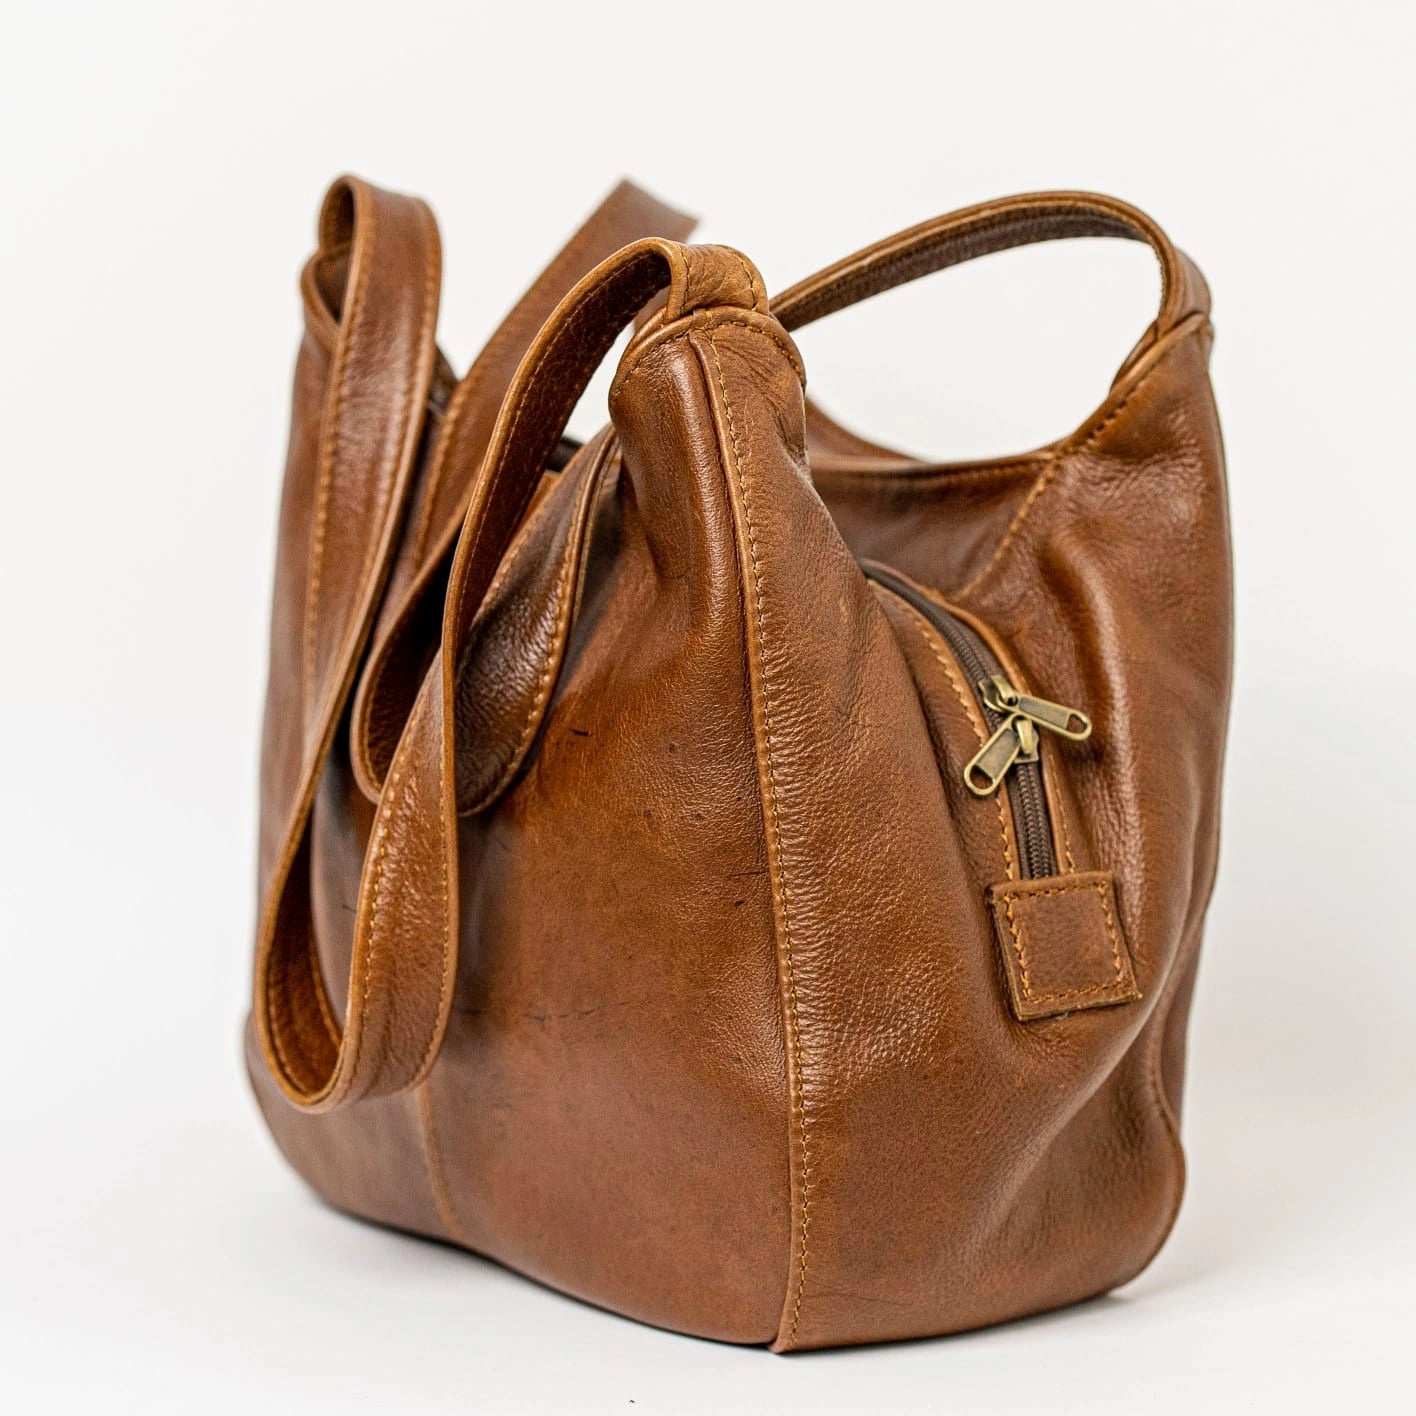 Corra leather bags pecan tan from Cape Masai Leather 